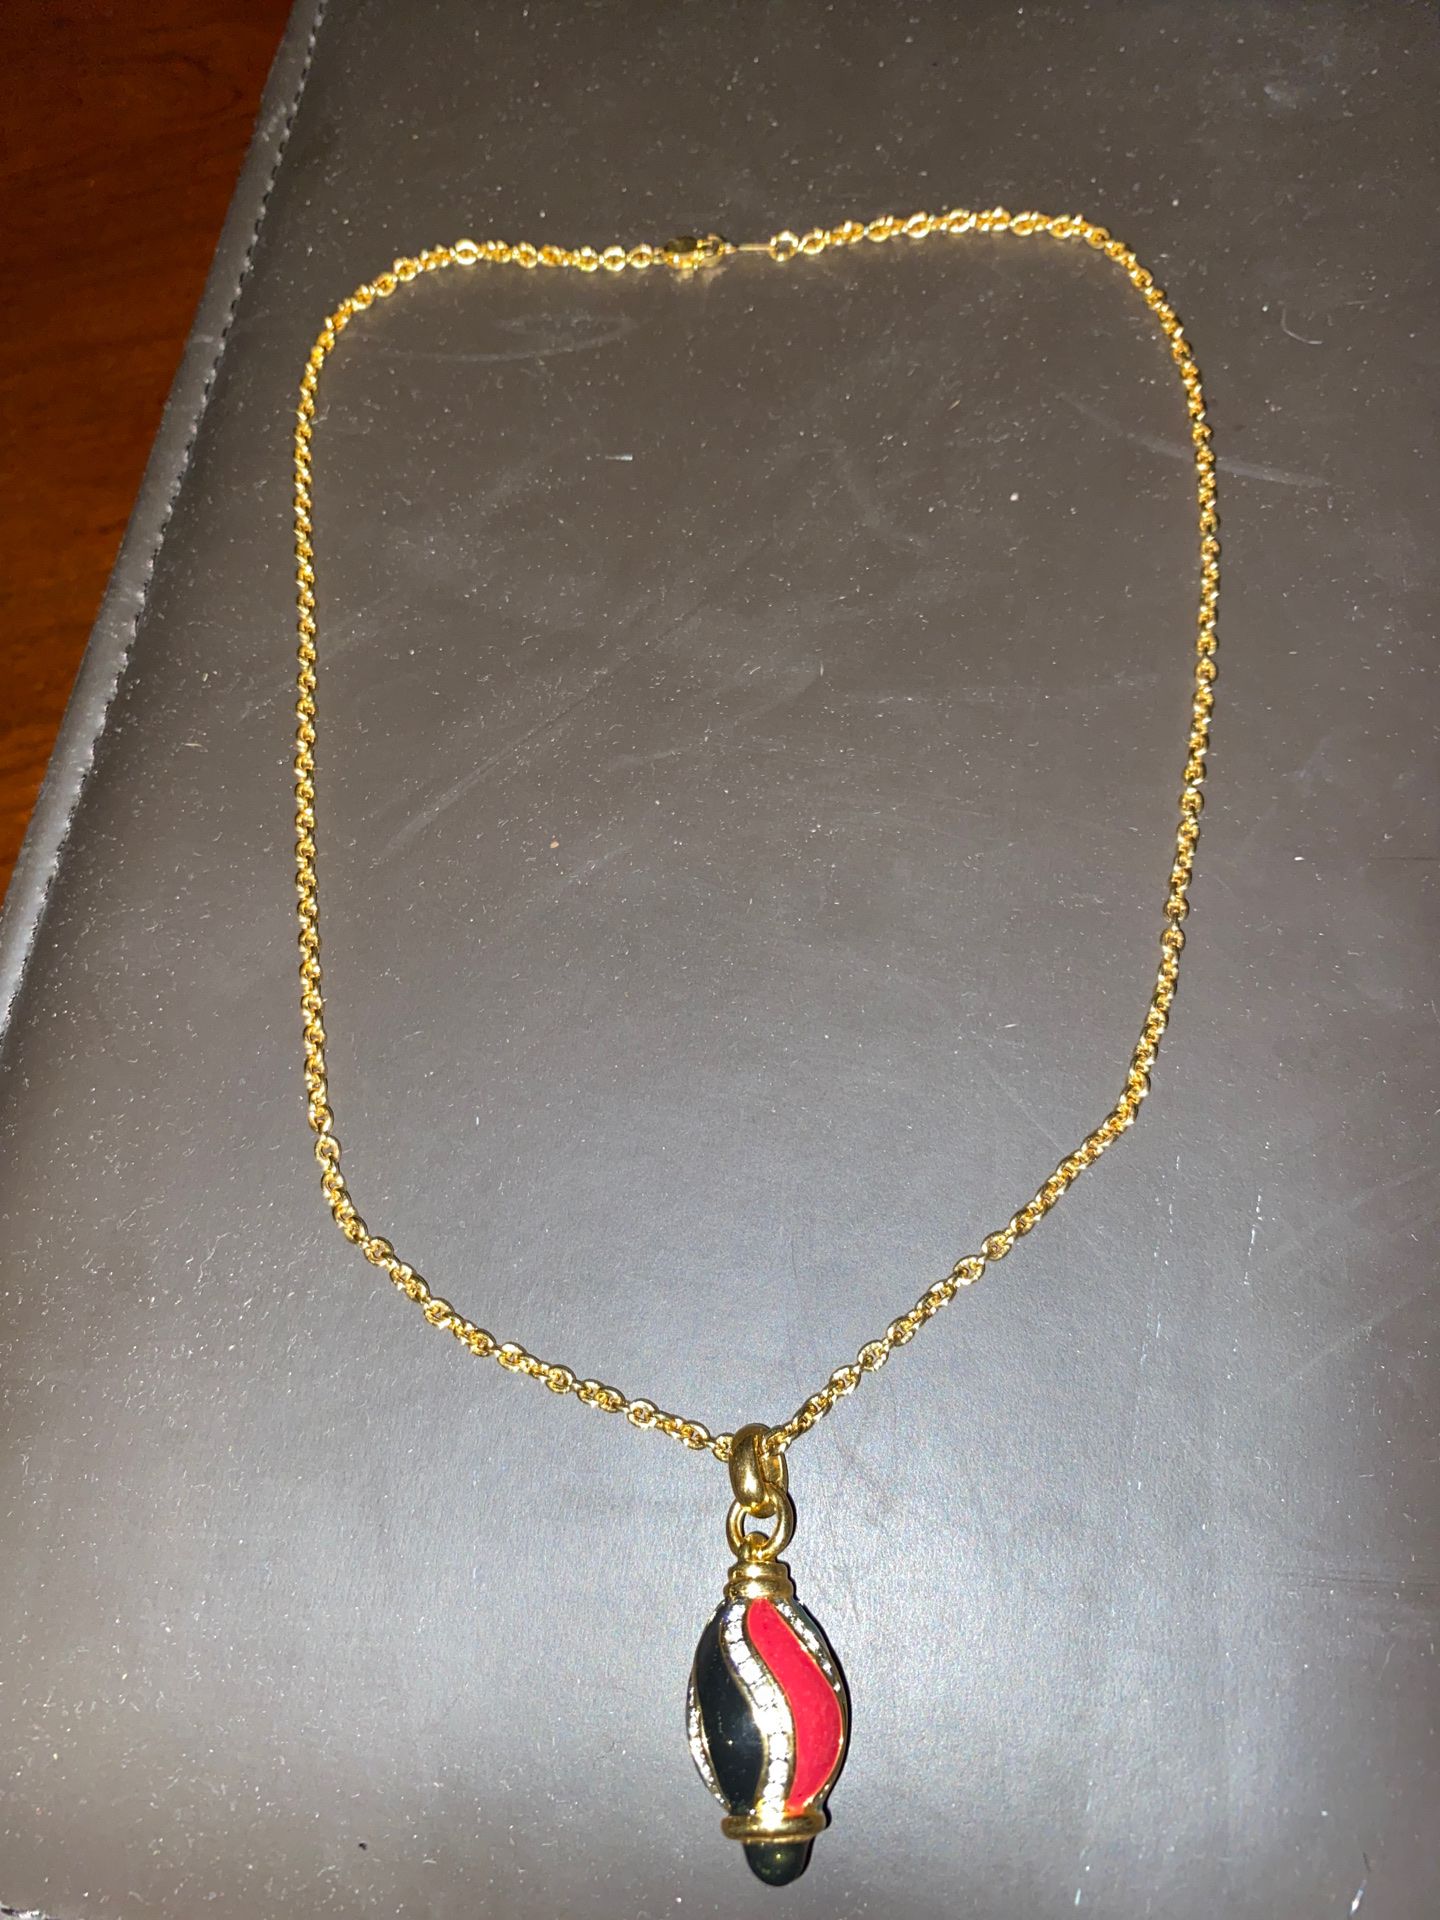 18k gf necklace with colorful charm